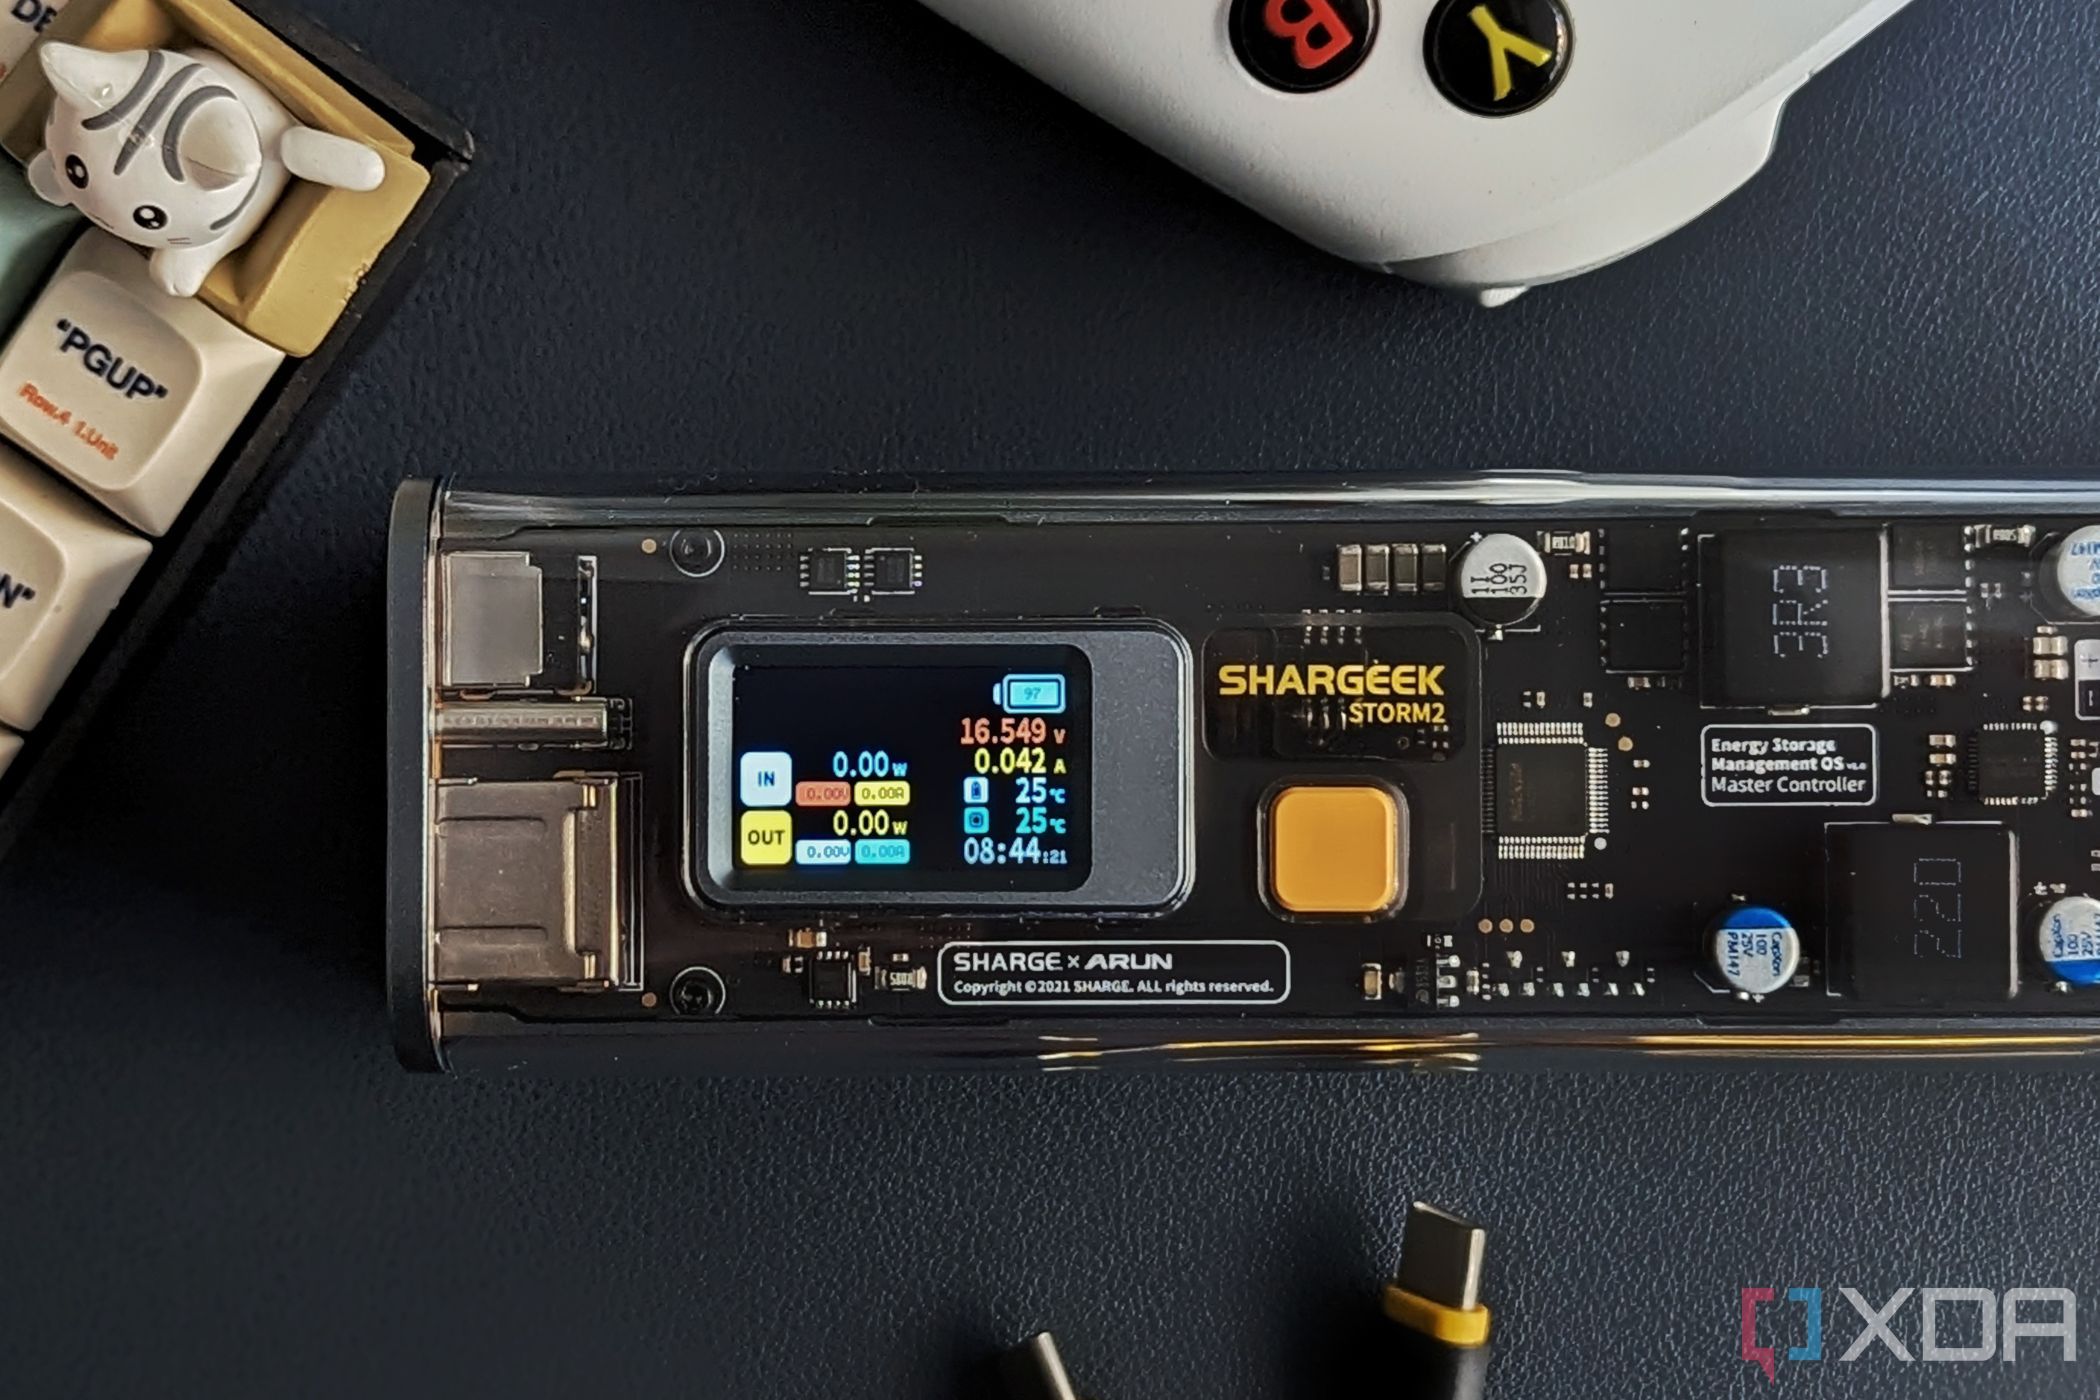 Shargeek's Storm 2 is a 100W power bank with a see-through design that is  absolutely ridiculous